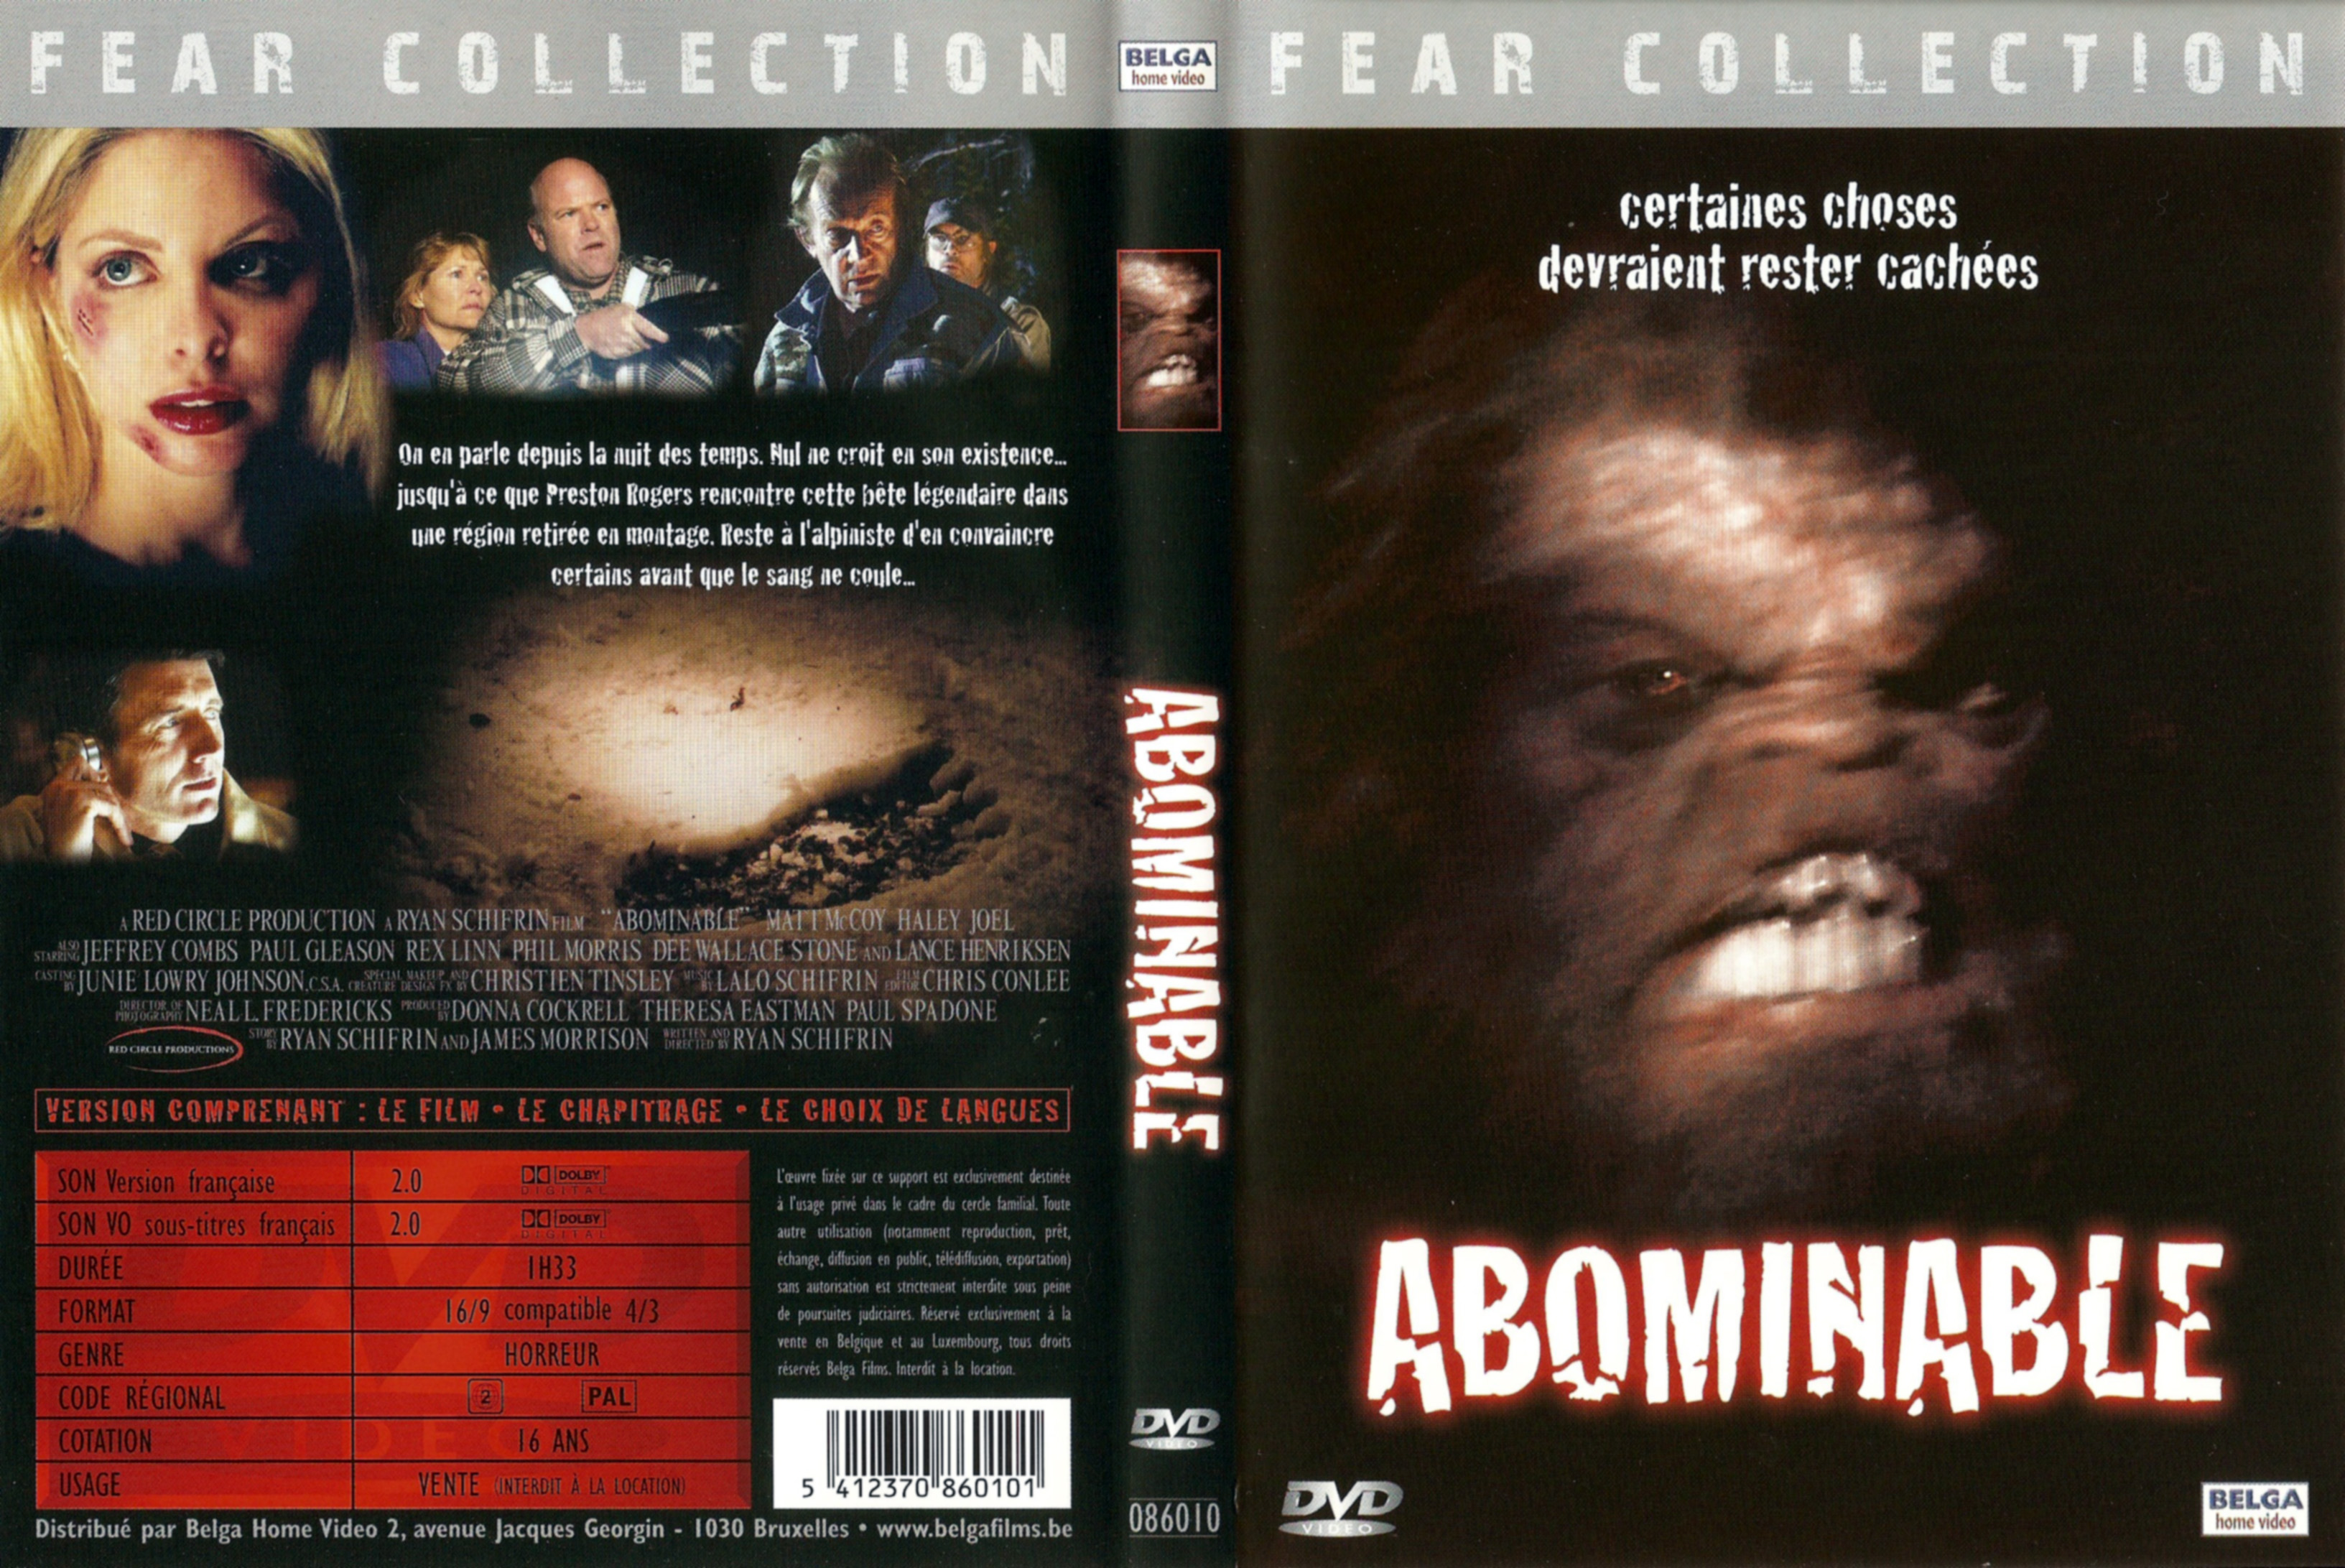 Jaquette DVD Abominable